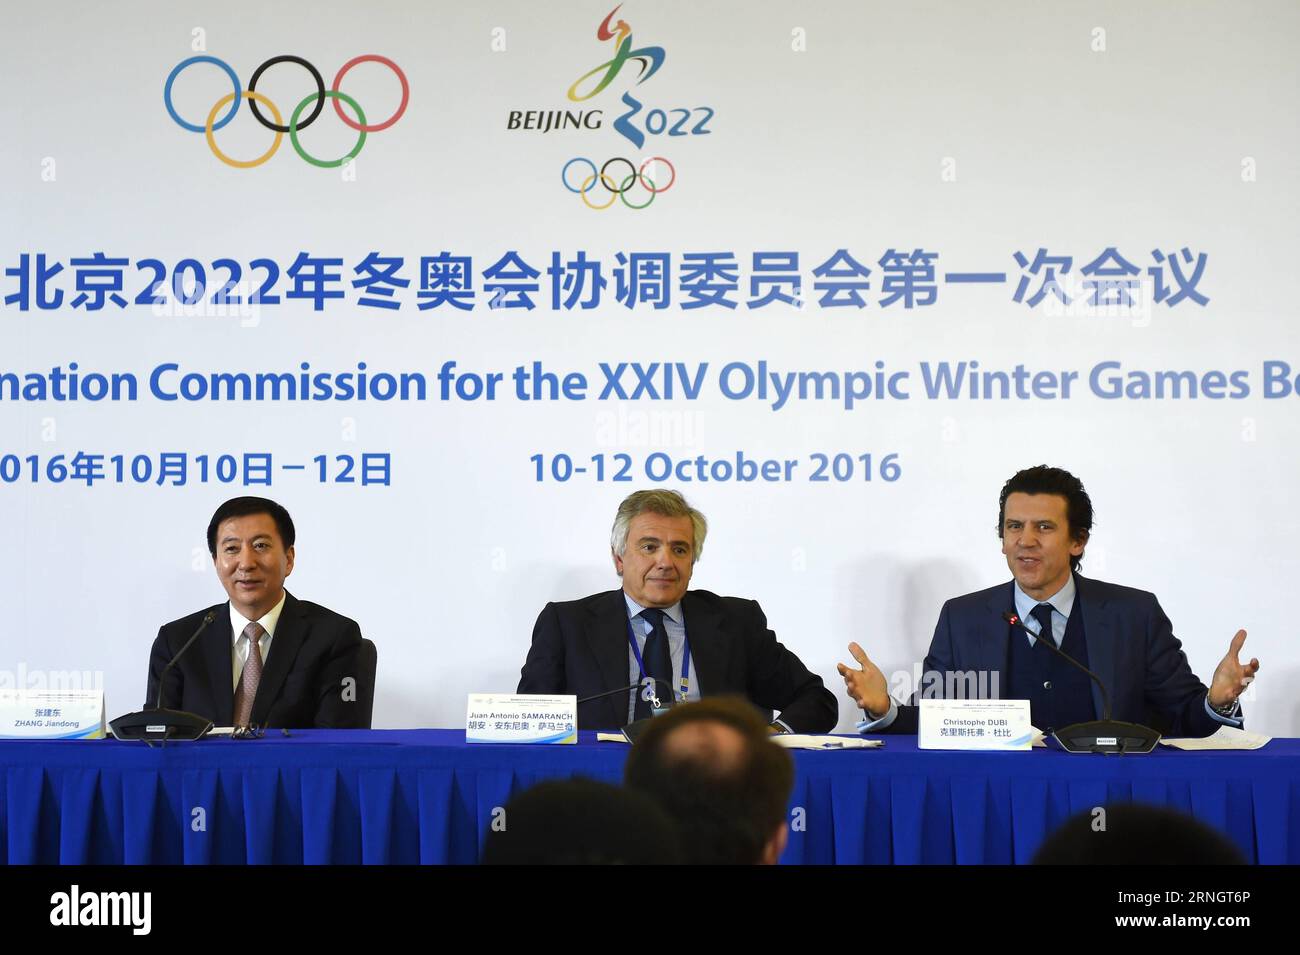 -- BEIJING, Oct. 12. 2016 -- Christophe Dubi (1st R), the IOC s executive director of the Olympic Games speaks during the press conference for the 1st Meeting of the IOC Coordination Commission for the XXIV Olympic Winter Games Beijing 2022 in Beijing, capital of China, Oct. 12, 2016. ) (SP)CHINA-BEIJING-2022 OLYMPIC WINTER GAMES-IOC COORDINATION COMMISSION-PRESS CONFERENCE (CN) JuxHuanzong PUBLICATIONxNOTxINxCHN   Beijing OCT 12 2016 Christophe Dubi 1st r The IOC S Executive Director of The Olympic Games Speaks during The Press Conference for The 1st Meeting of The IOC Coordination Commission Stock Photo